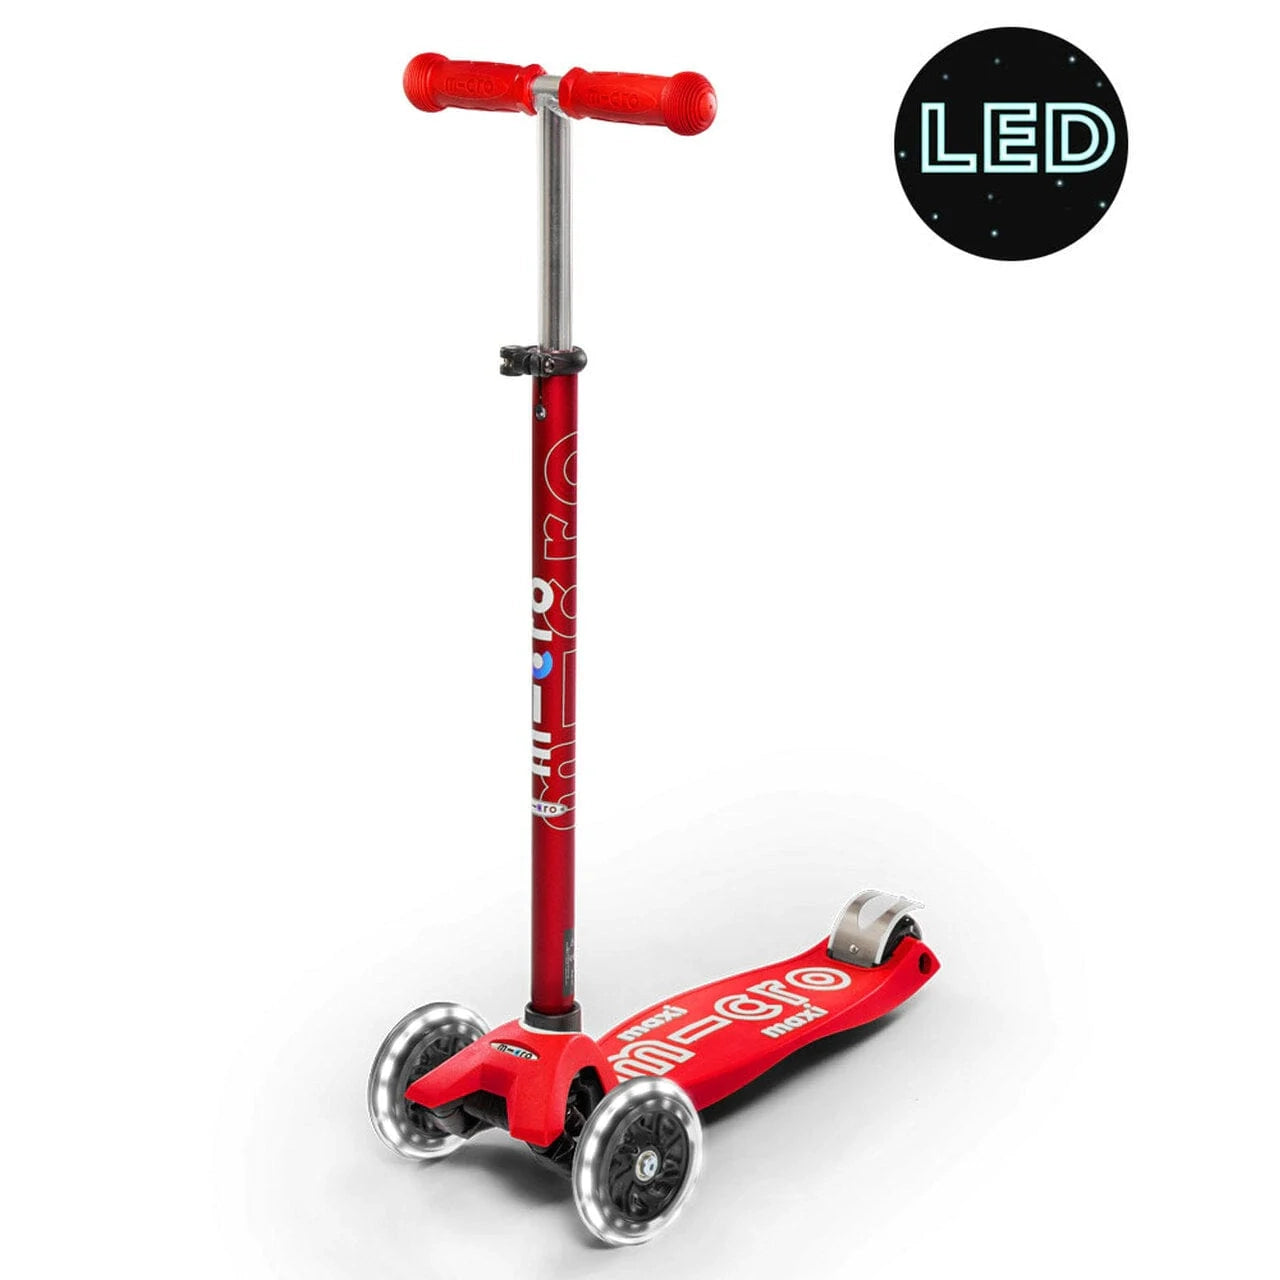 Maxi Micro Deluxe LED Scooter (Red)